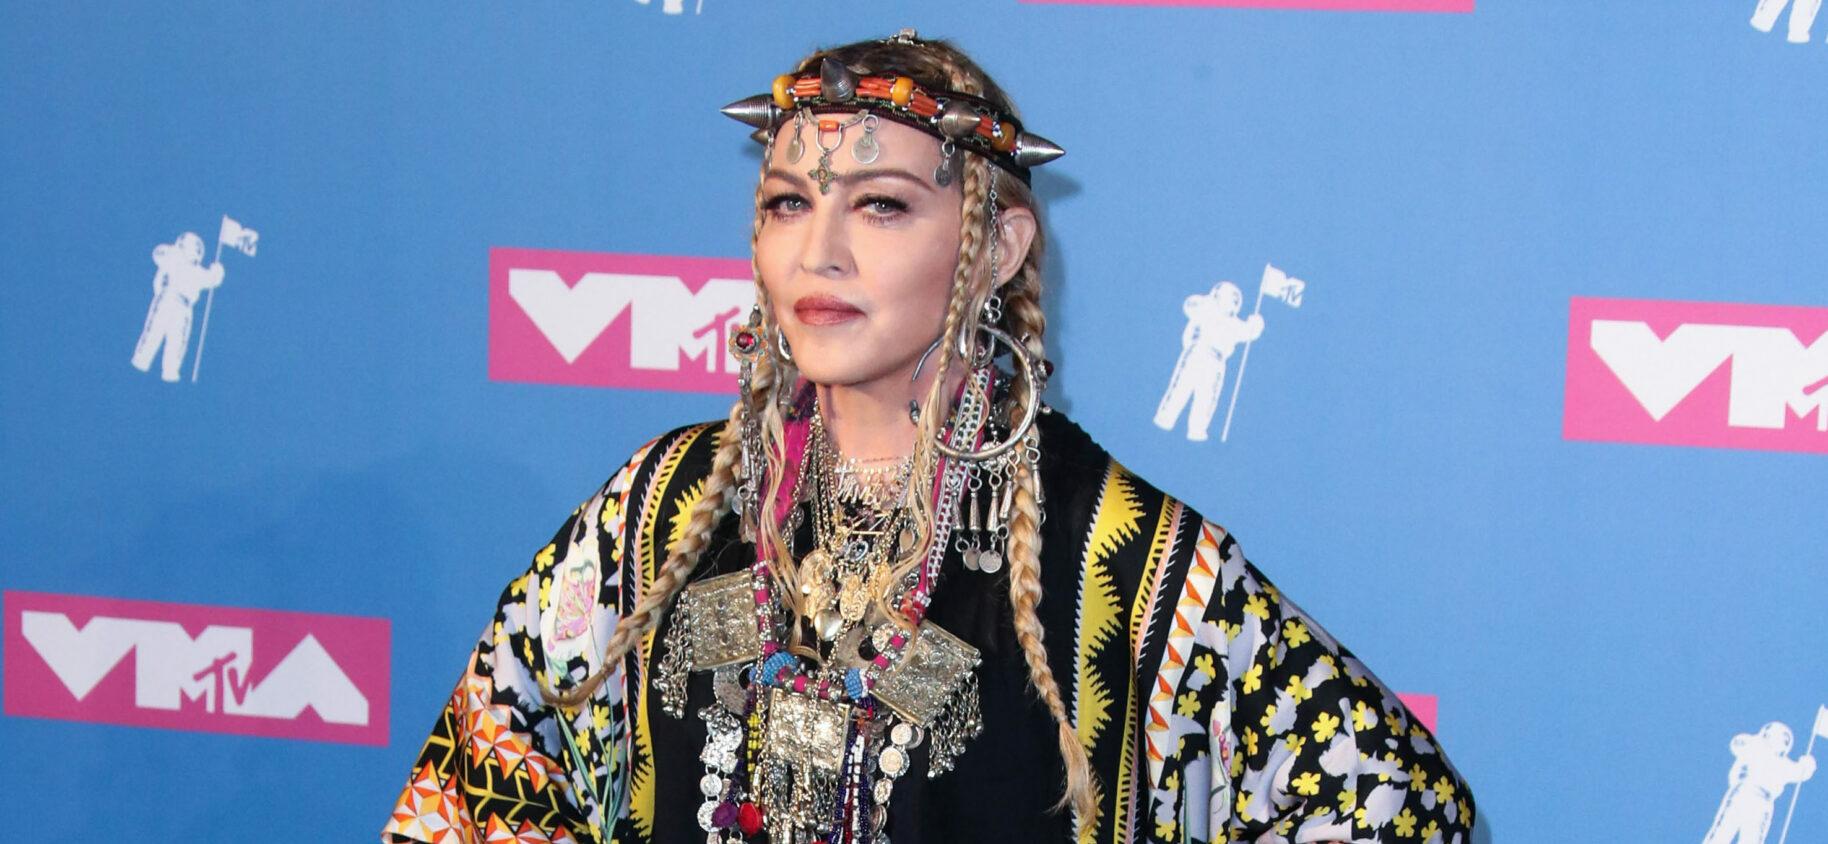 A photo showing Madonna at an event in a traditional outfit.